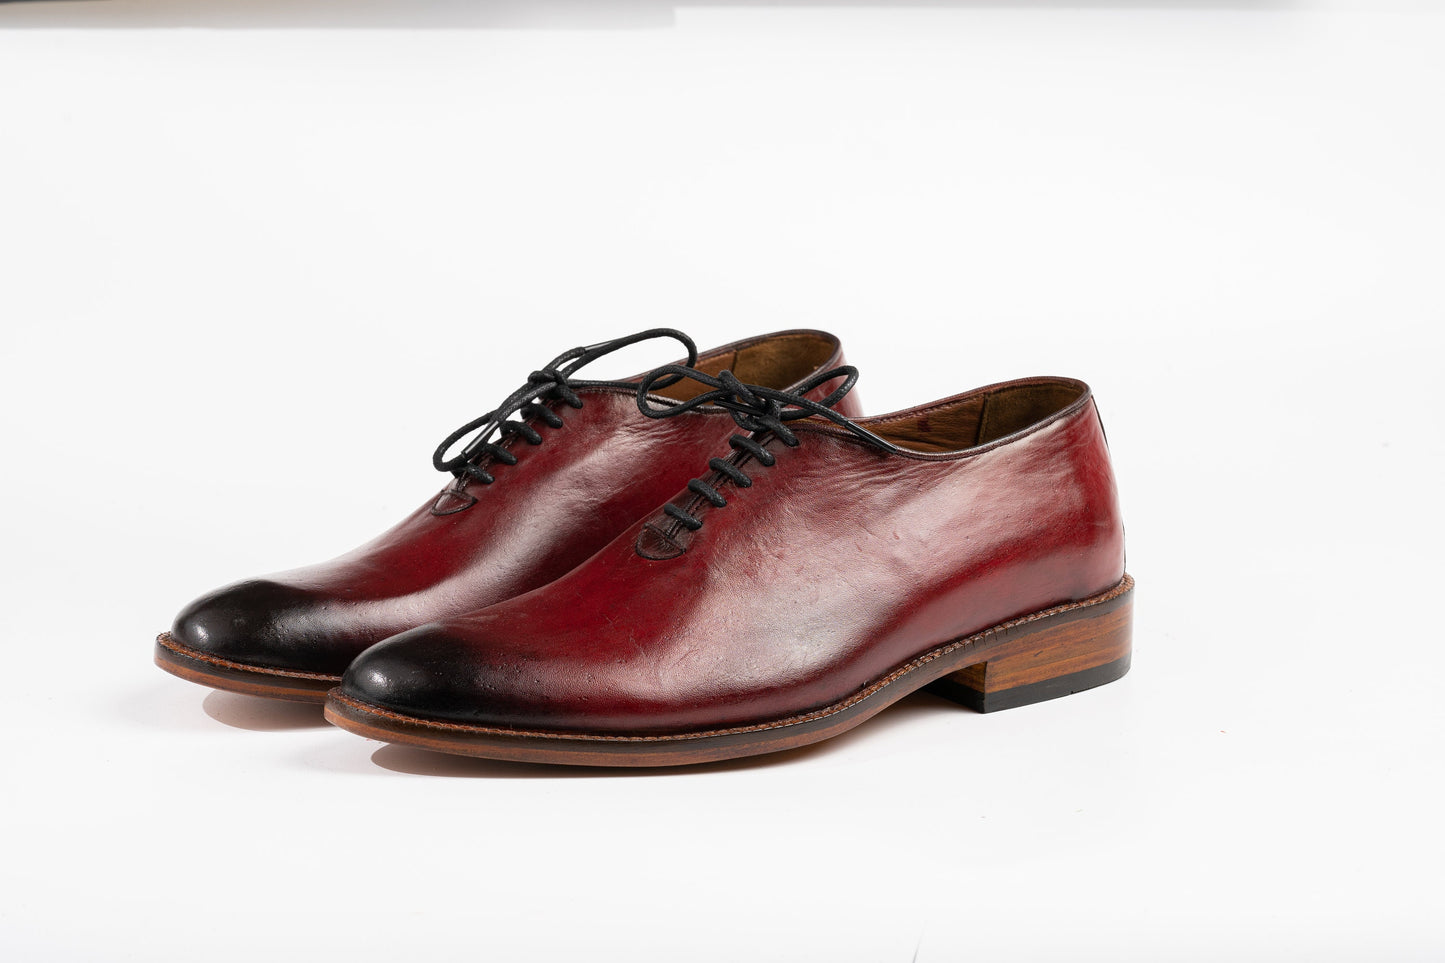 Red Wholecut Oxford Shoes Hand Welted Real Crust Leather Luxury Shoes Made To Order Customized Formal Shoes Suit Shoes Maroon Patina Shoes Woozy Store